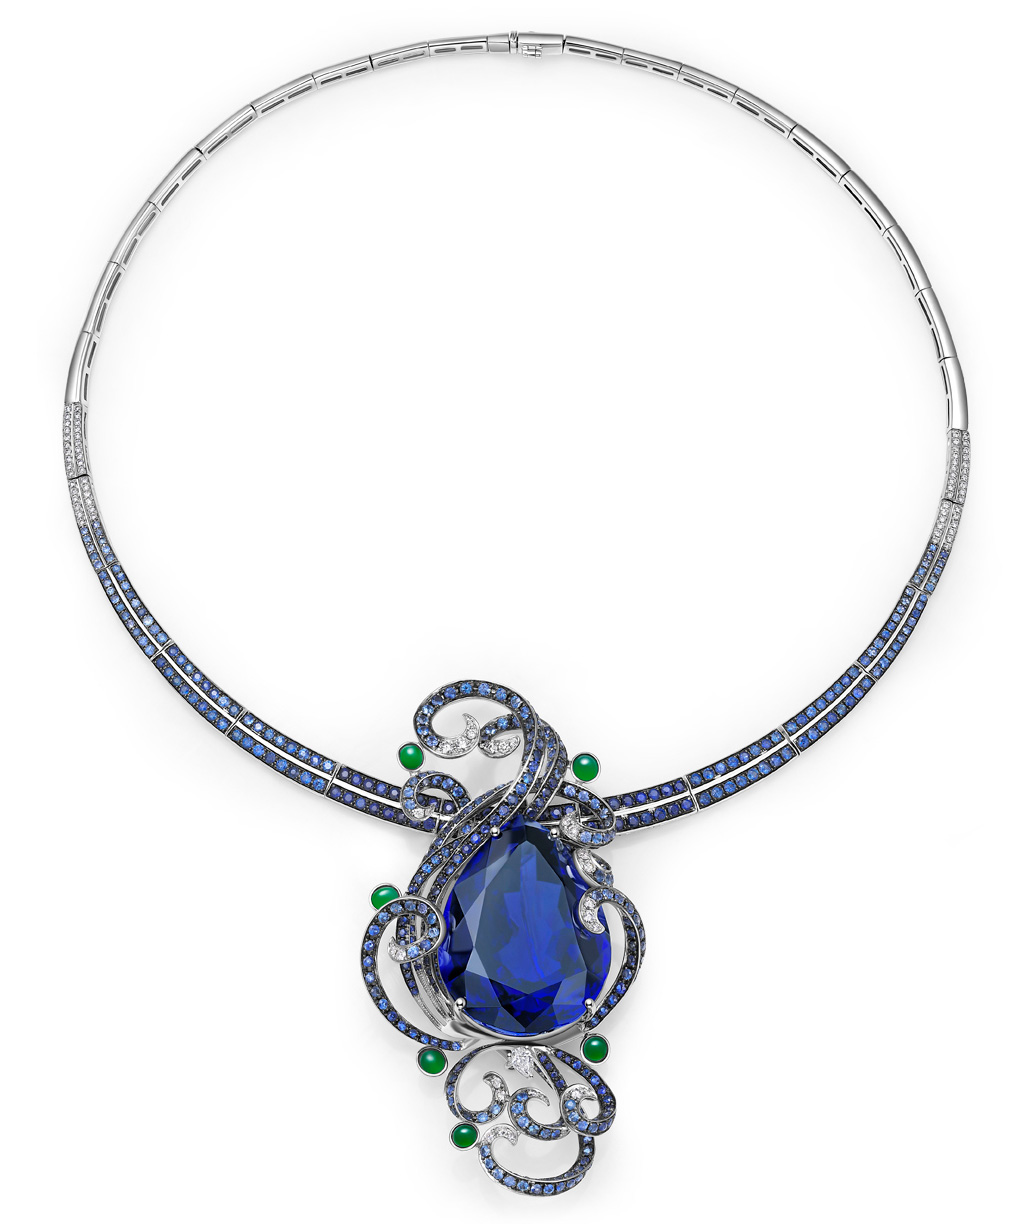 Fei Liu necklace with a 103 carats pear-cut tanzanite, blue sapphires, diamonds and jade